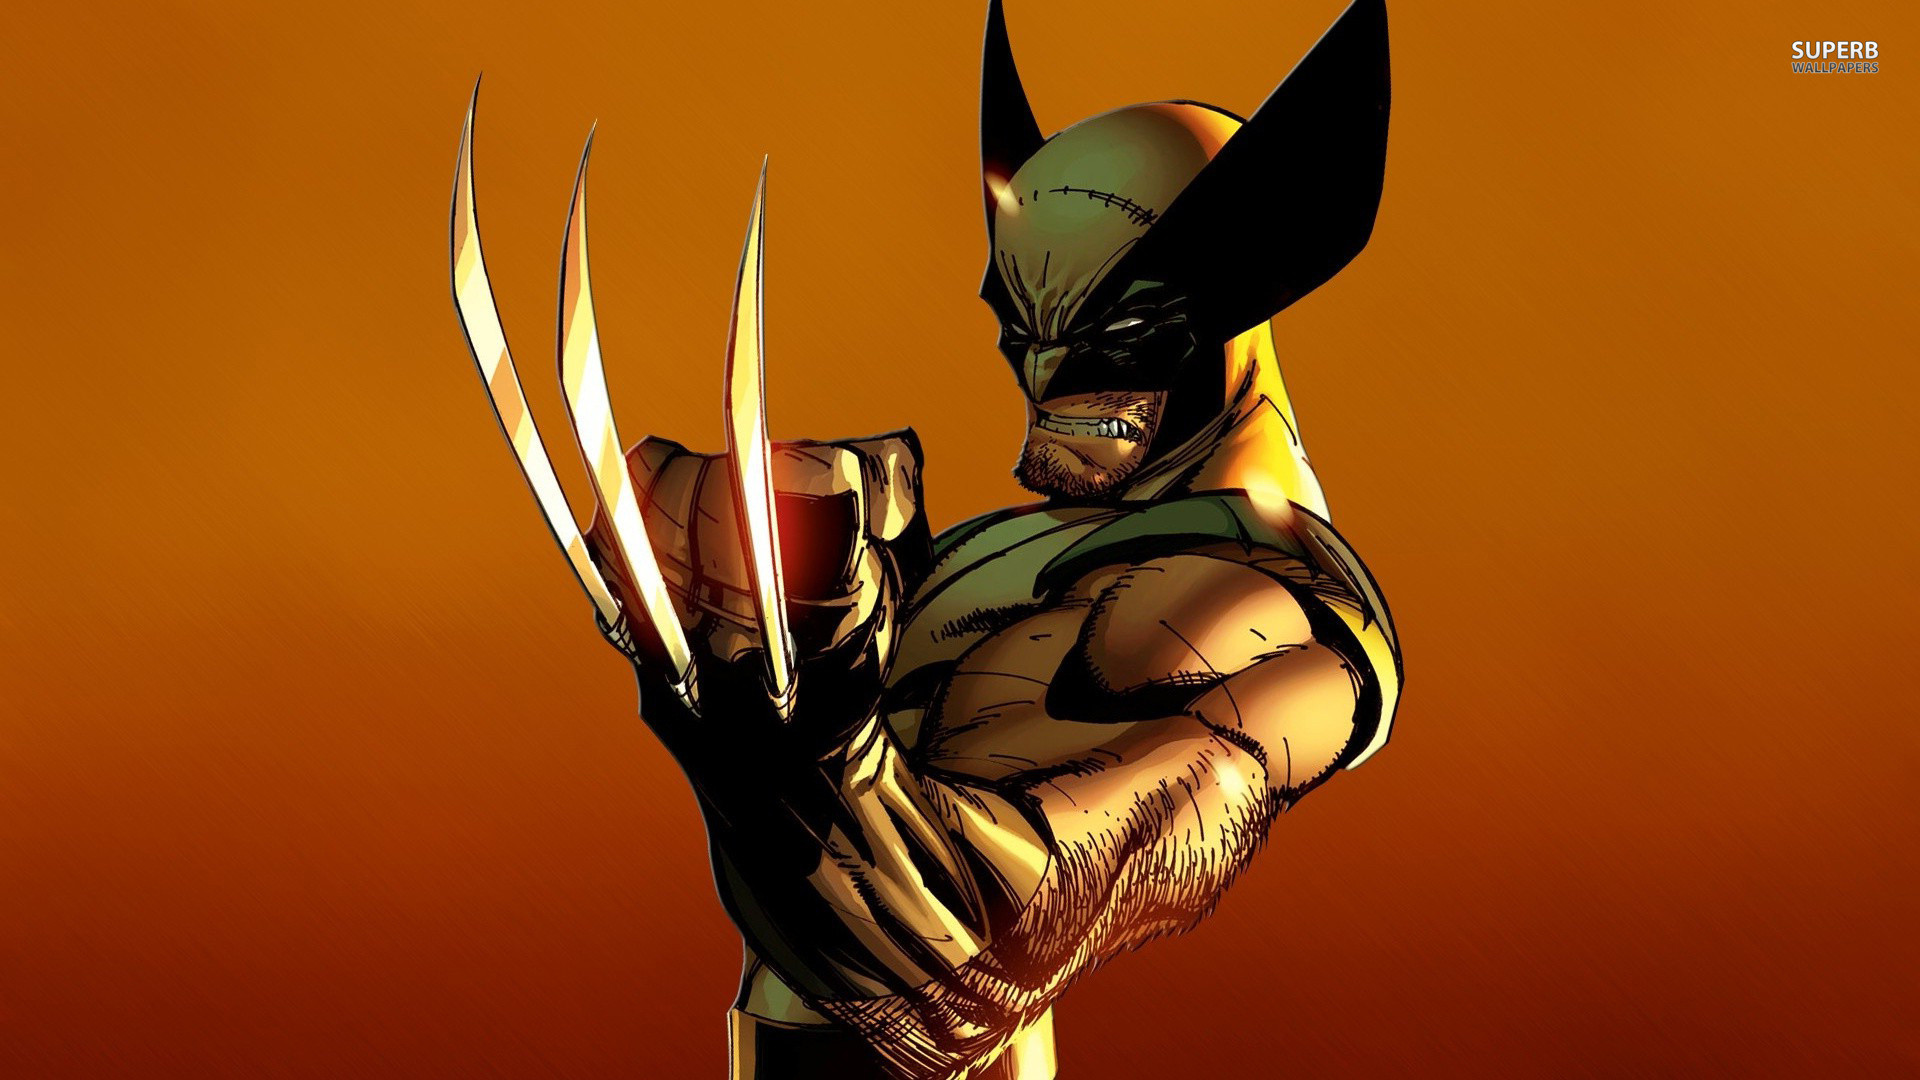 1920x1080 Wolverine Wallpapers p Epic Wallpaperz Wolverine Pics Wallpapers Wallpapers)